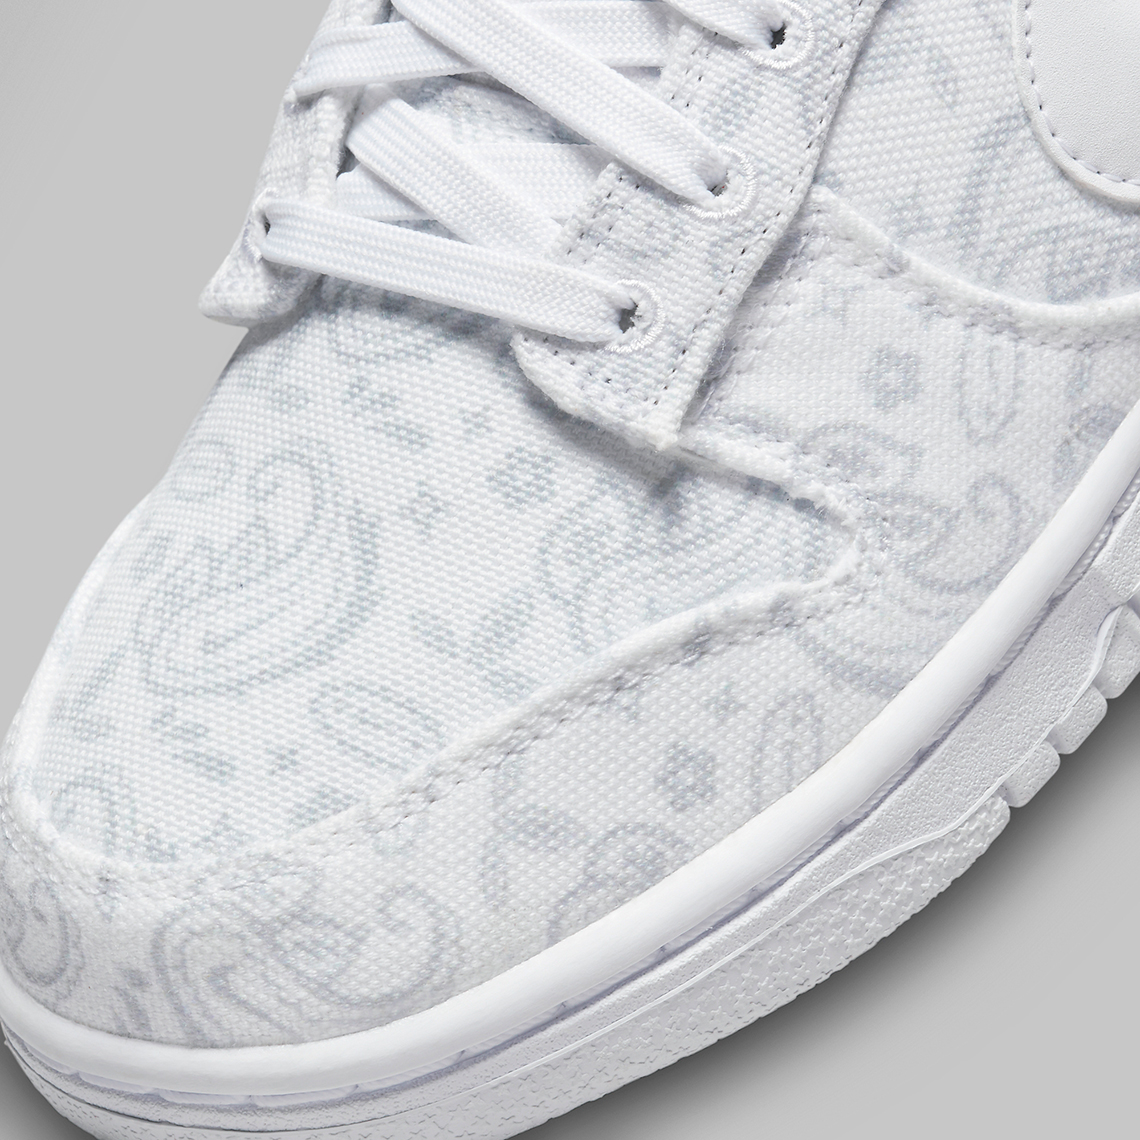 nike dunk low paisley white grey dj9955 100 release date 2